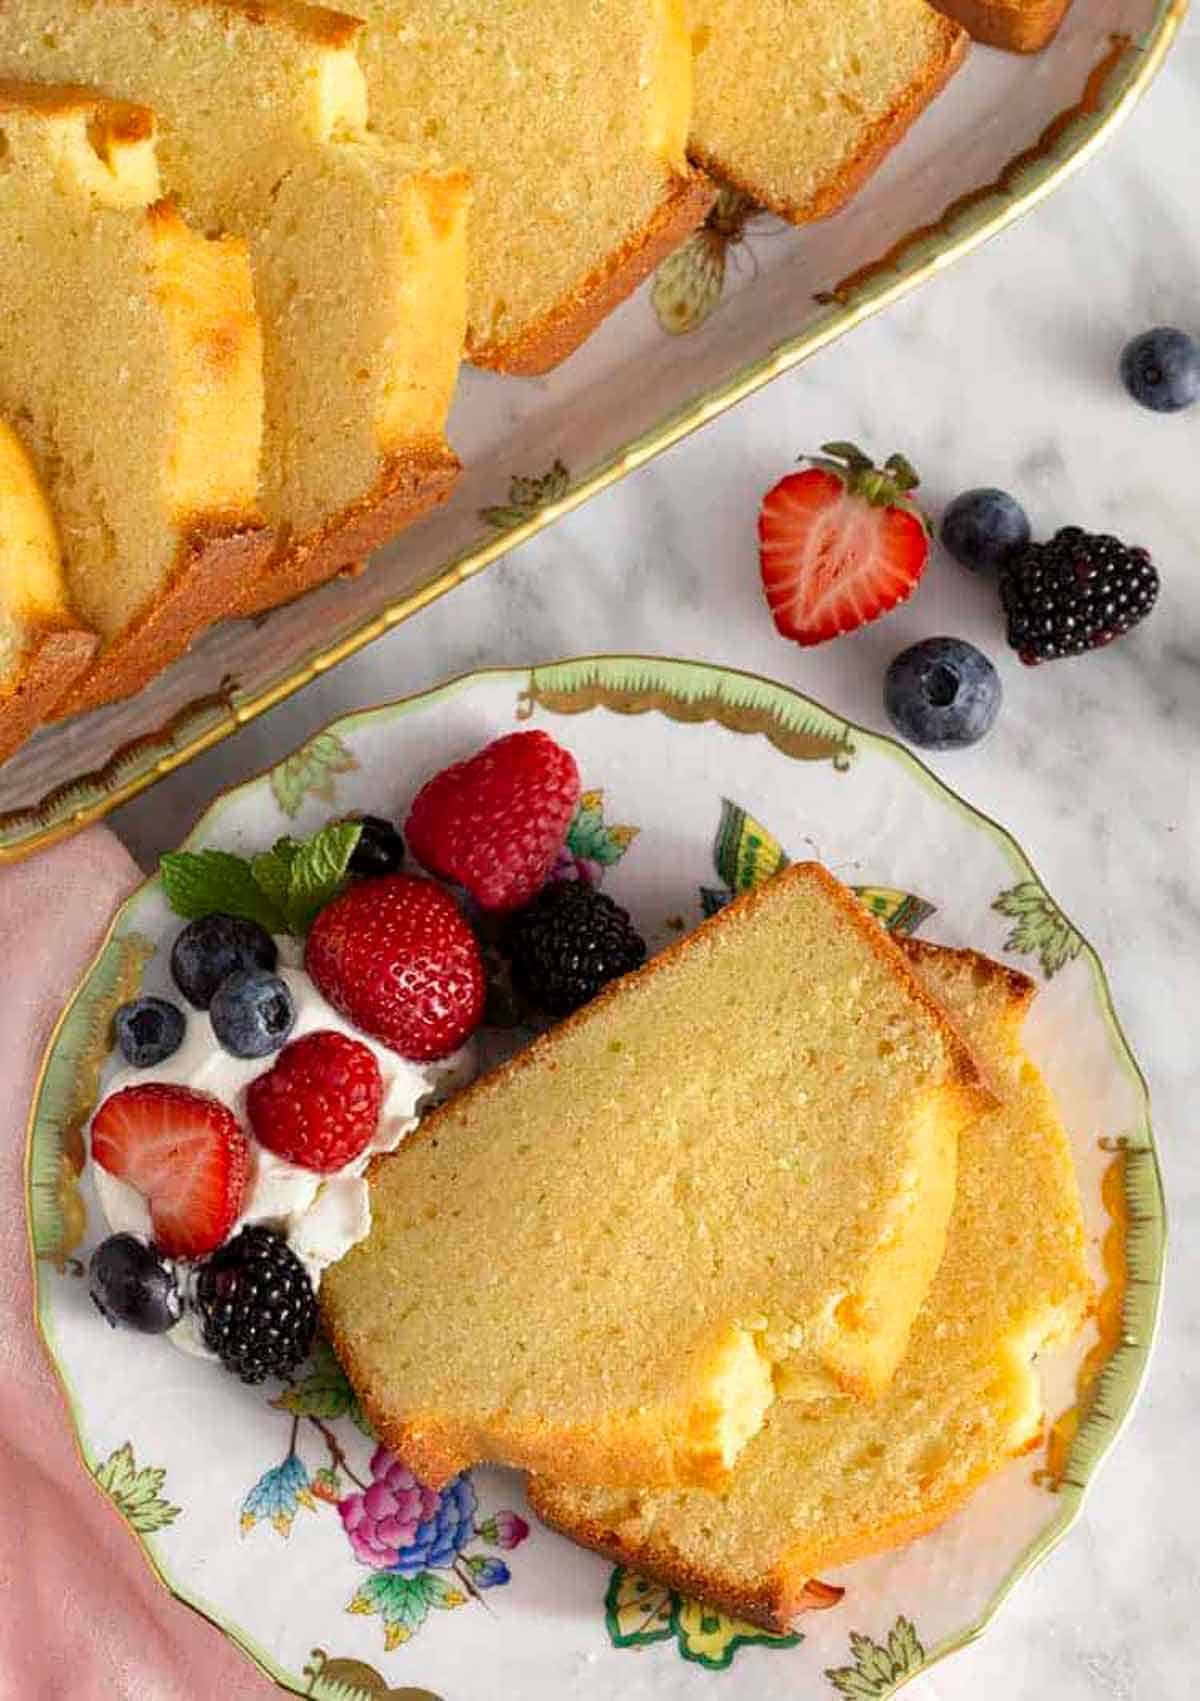 Overhead view of a plate with two slices of pound cake with berries and whipped cream.